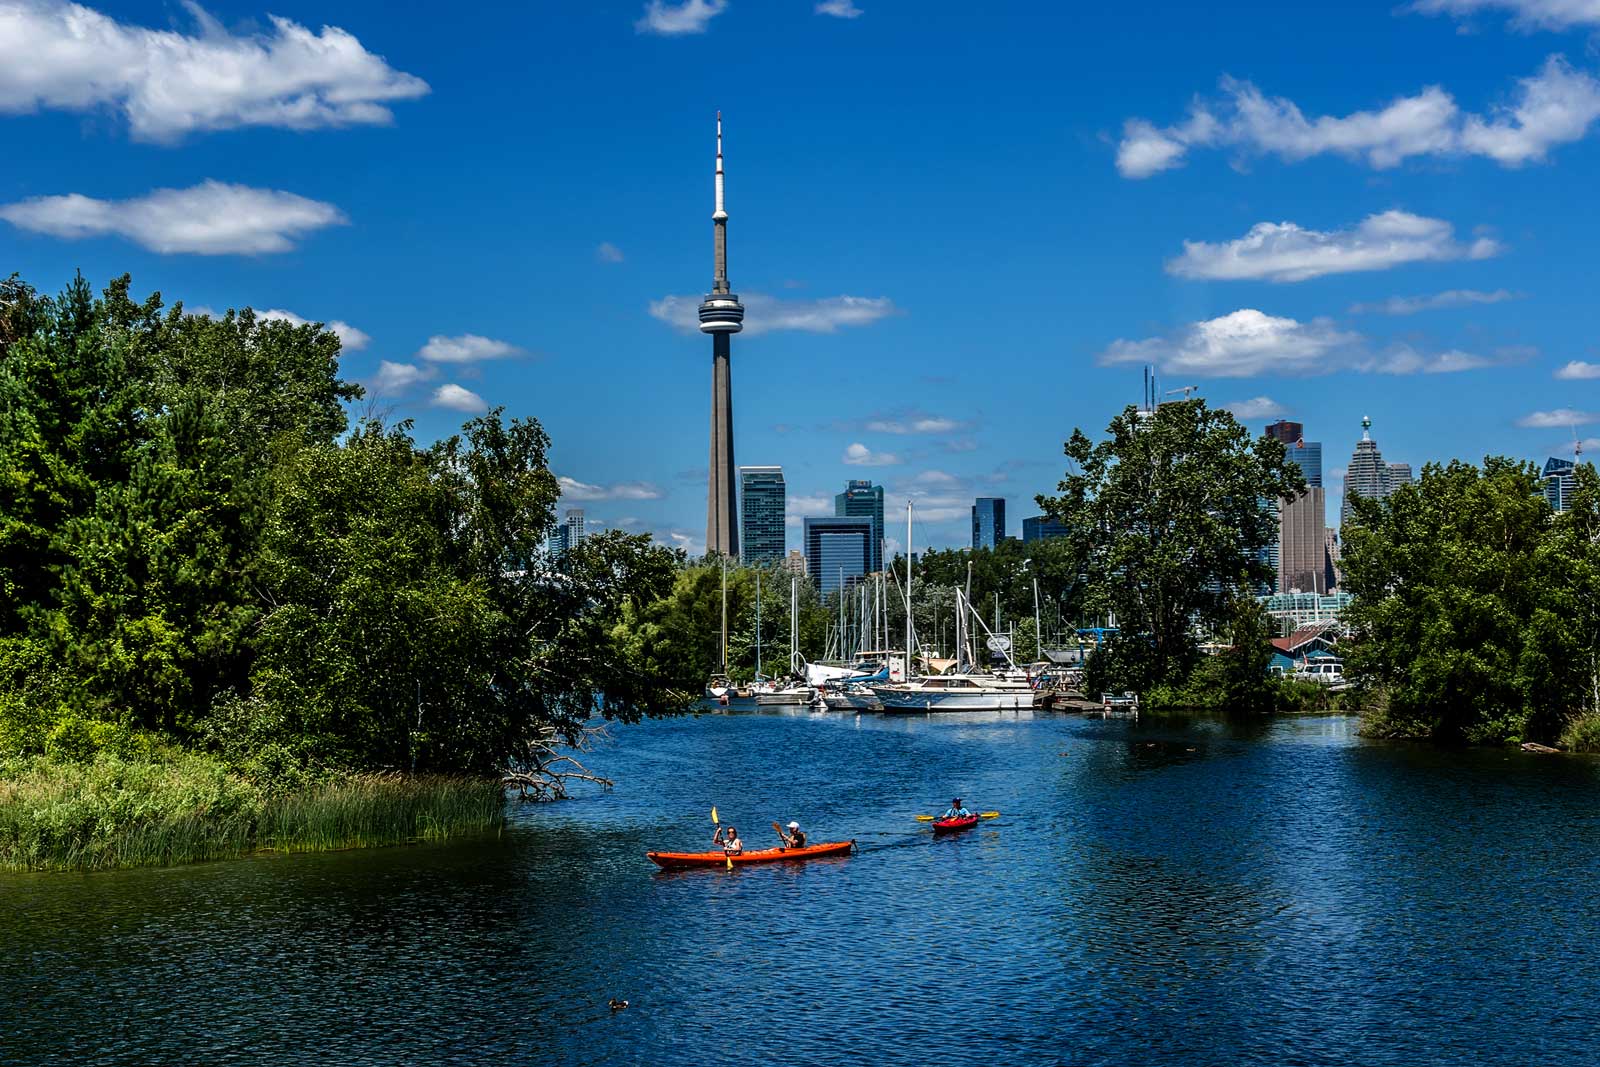 2 kayaks are paddled through water surrounded by trees. In the distance, the CN tower and Toronto buildings stand.